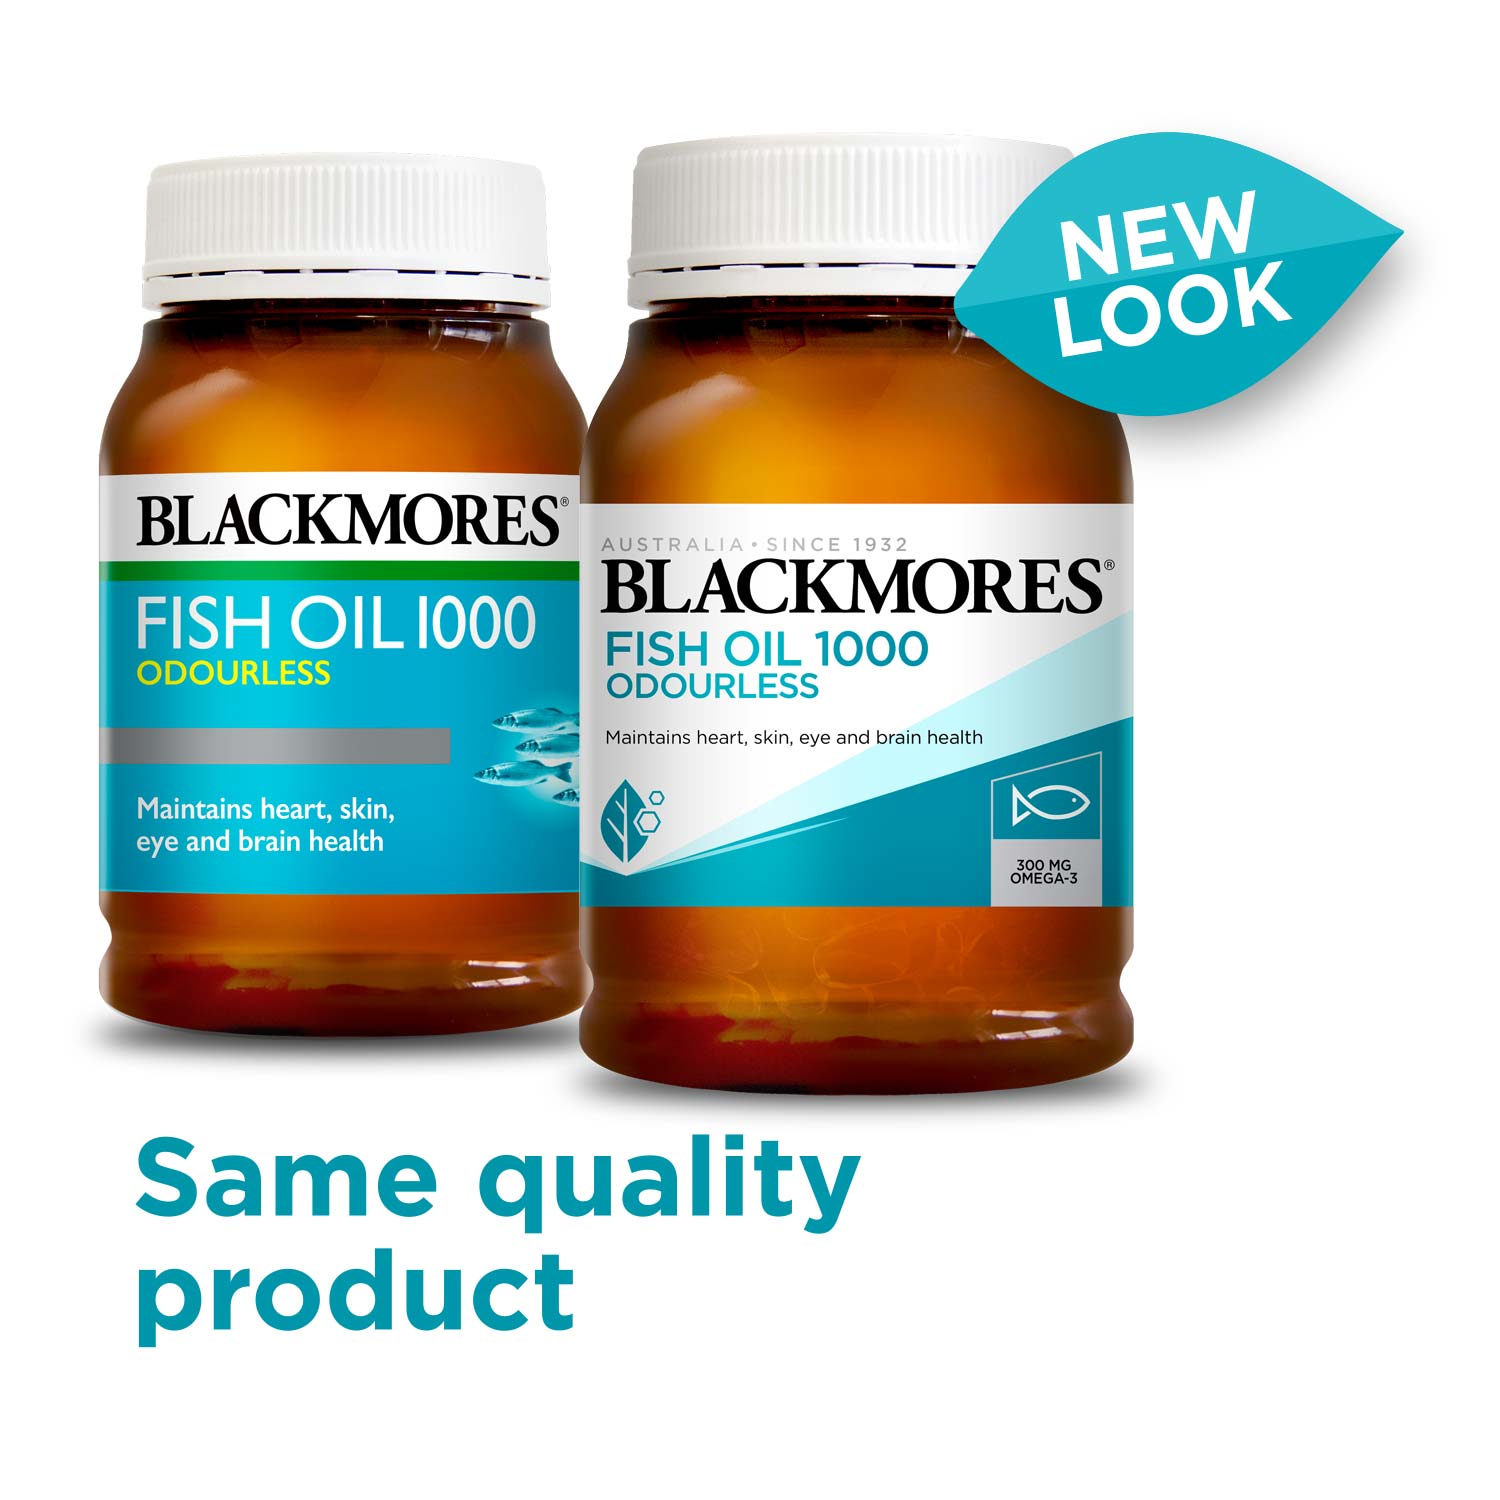 Blackmores Fish Oil 1000 Odourless new look label